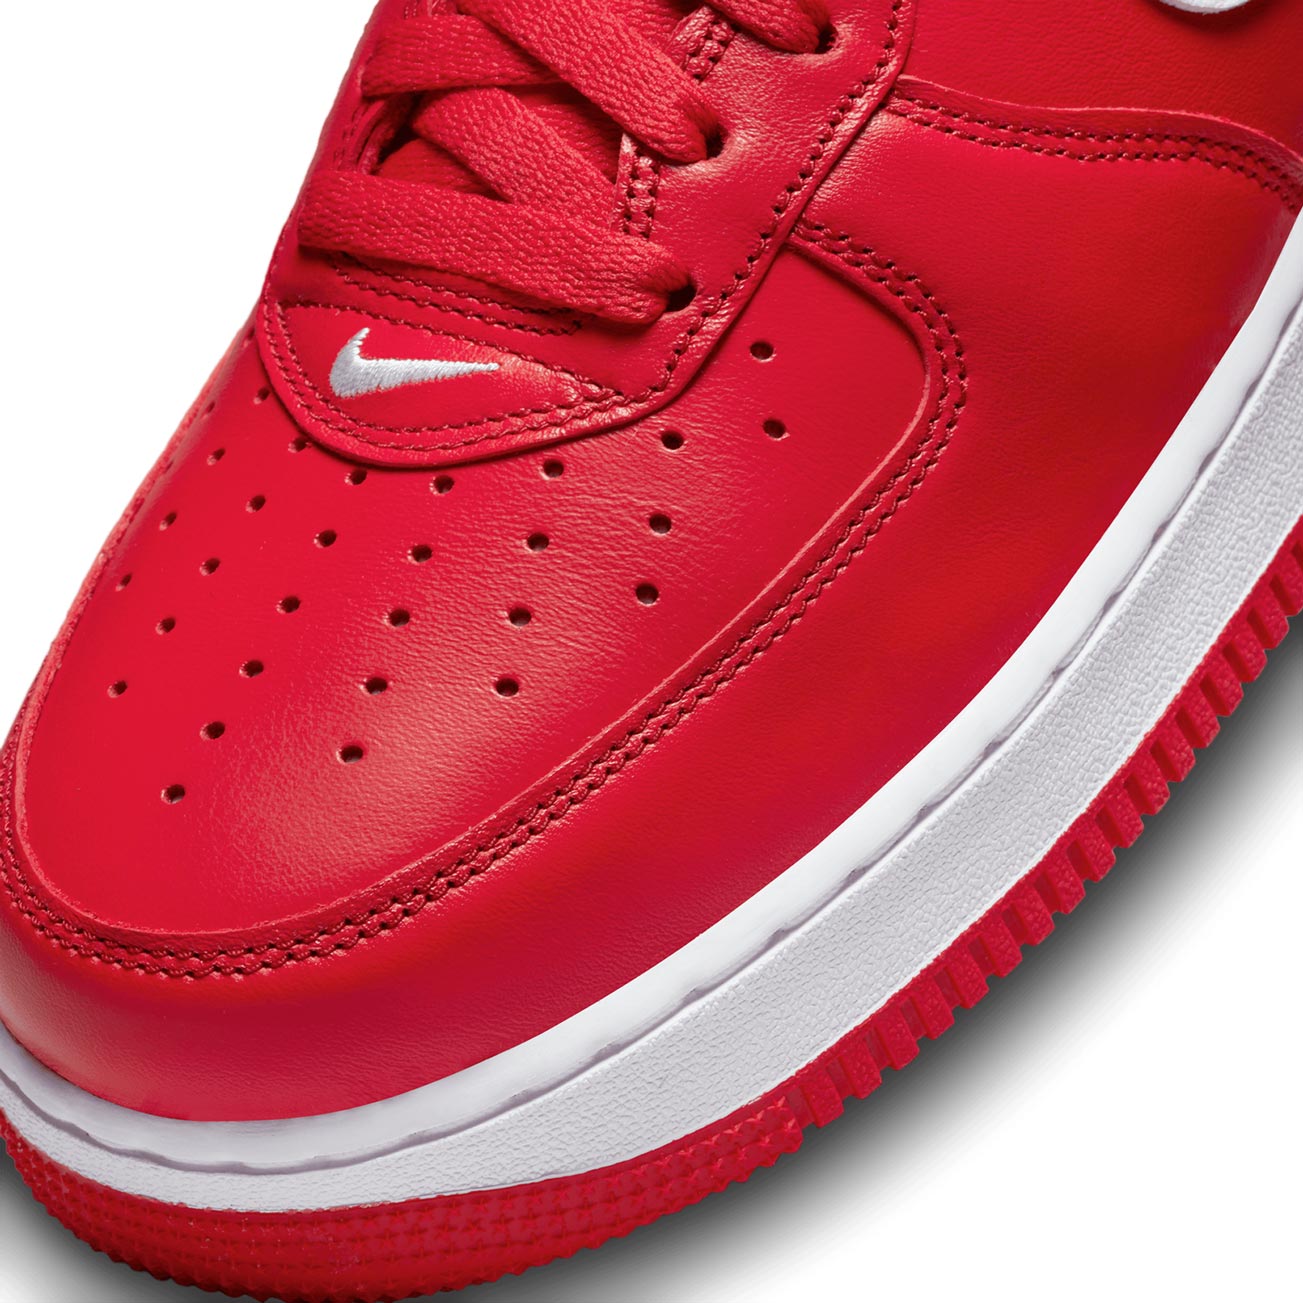 Air Force 1 Low Retro QS FD7039-600 University Red